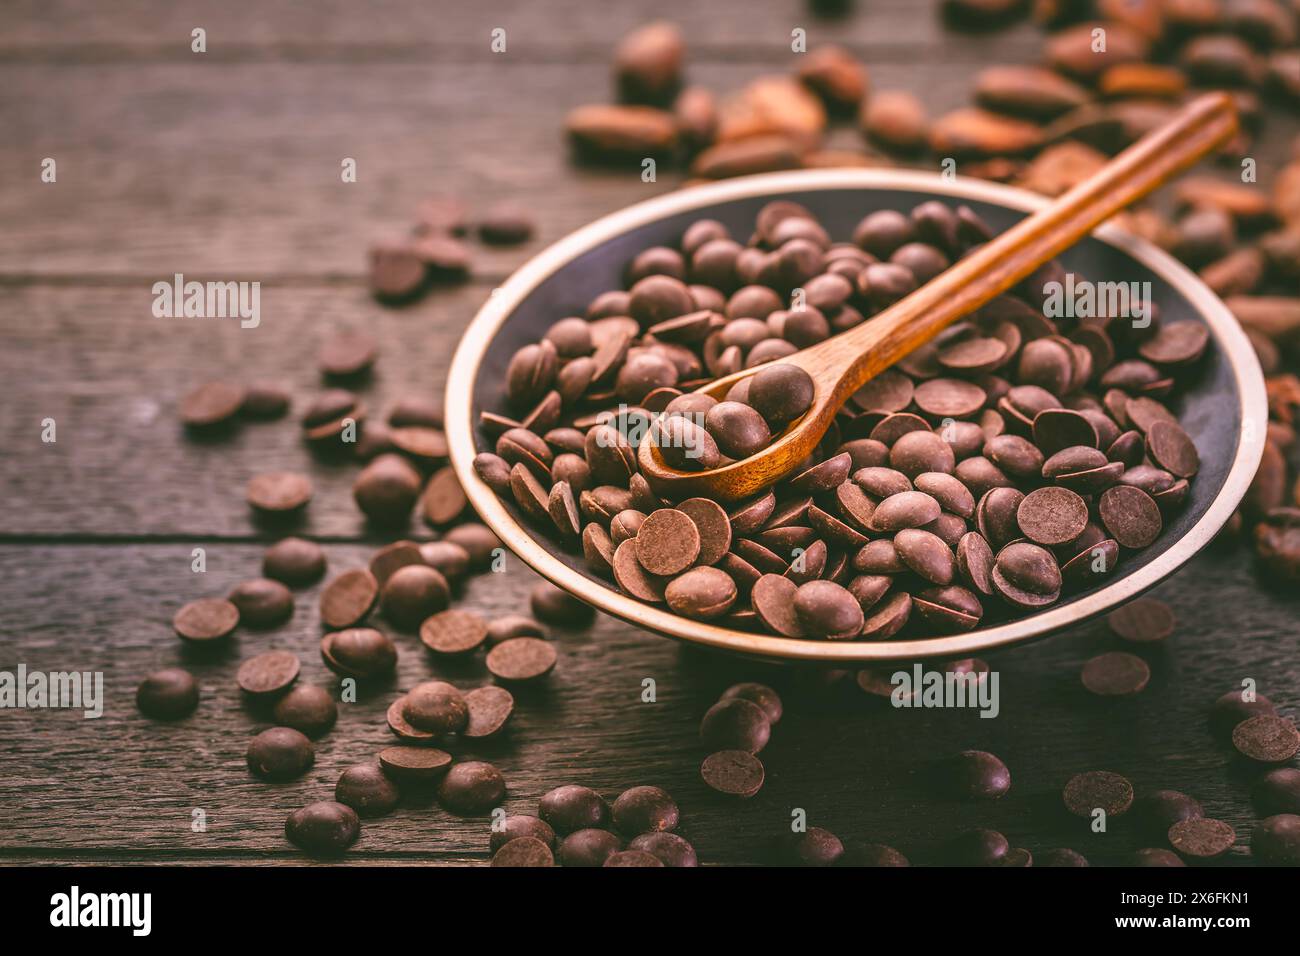 Bittersweet dark chocolate drops with cocoa beans, sugar-free couverture, baking and cooking ingredient Stock Photo